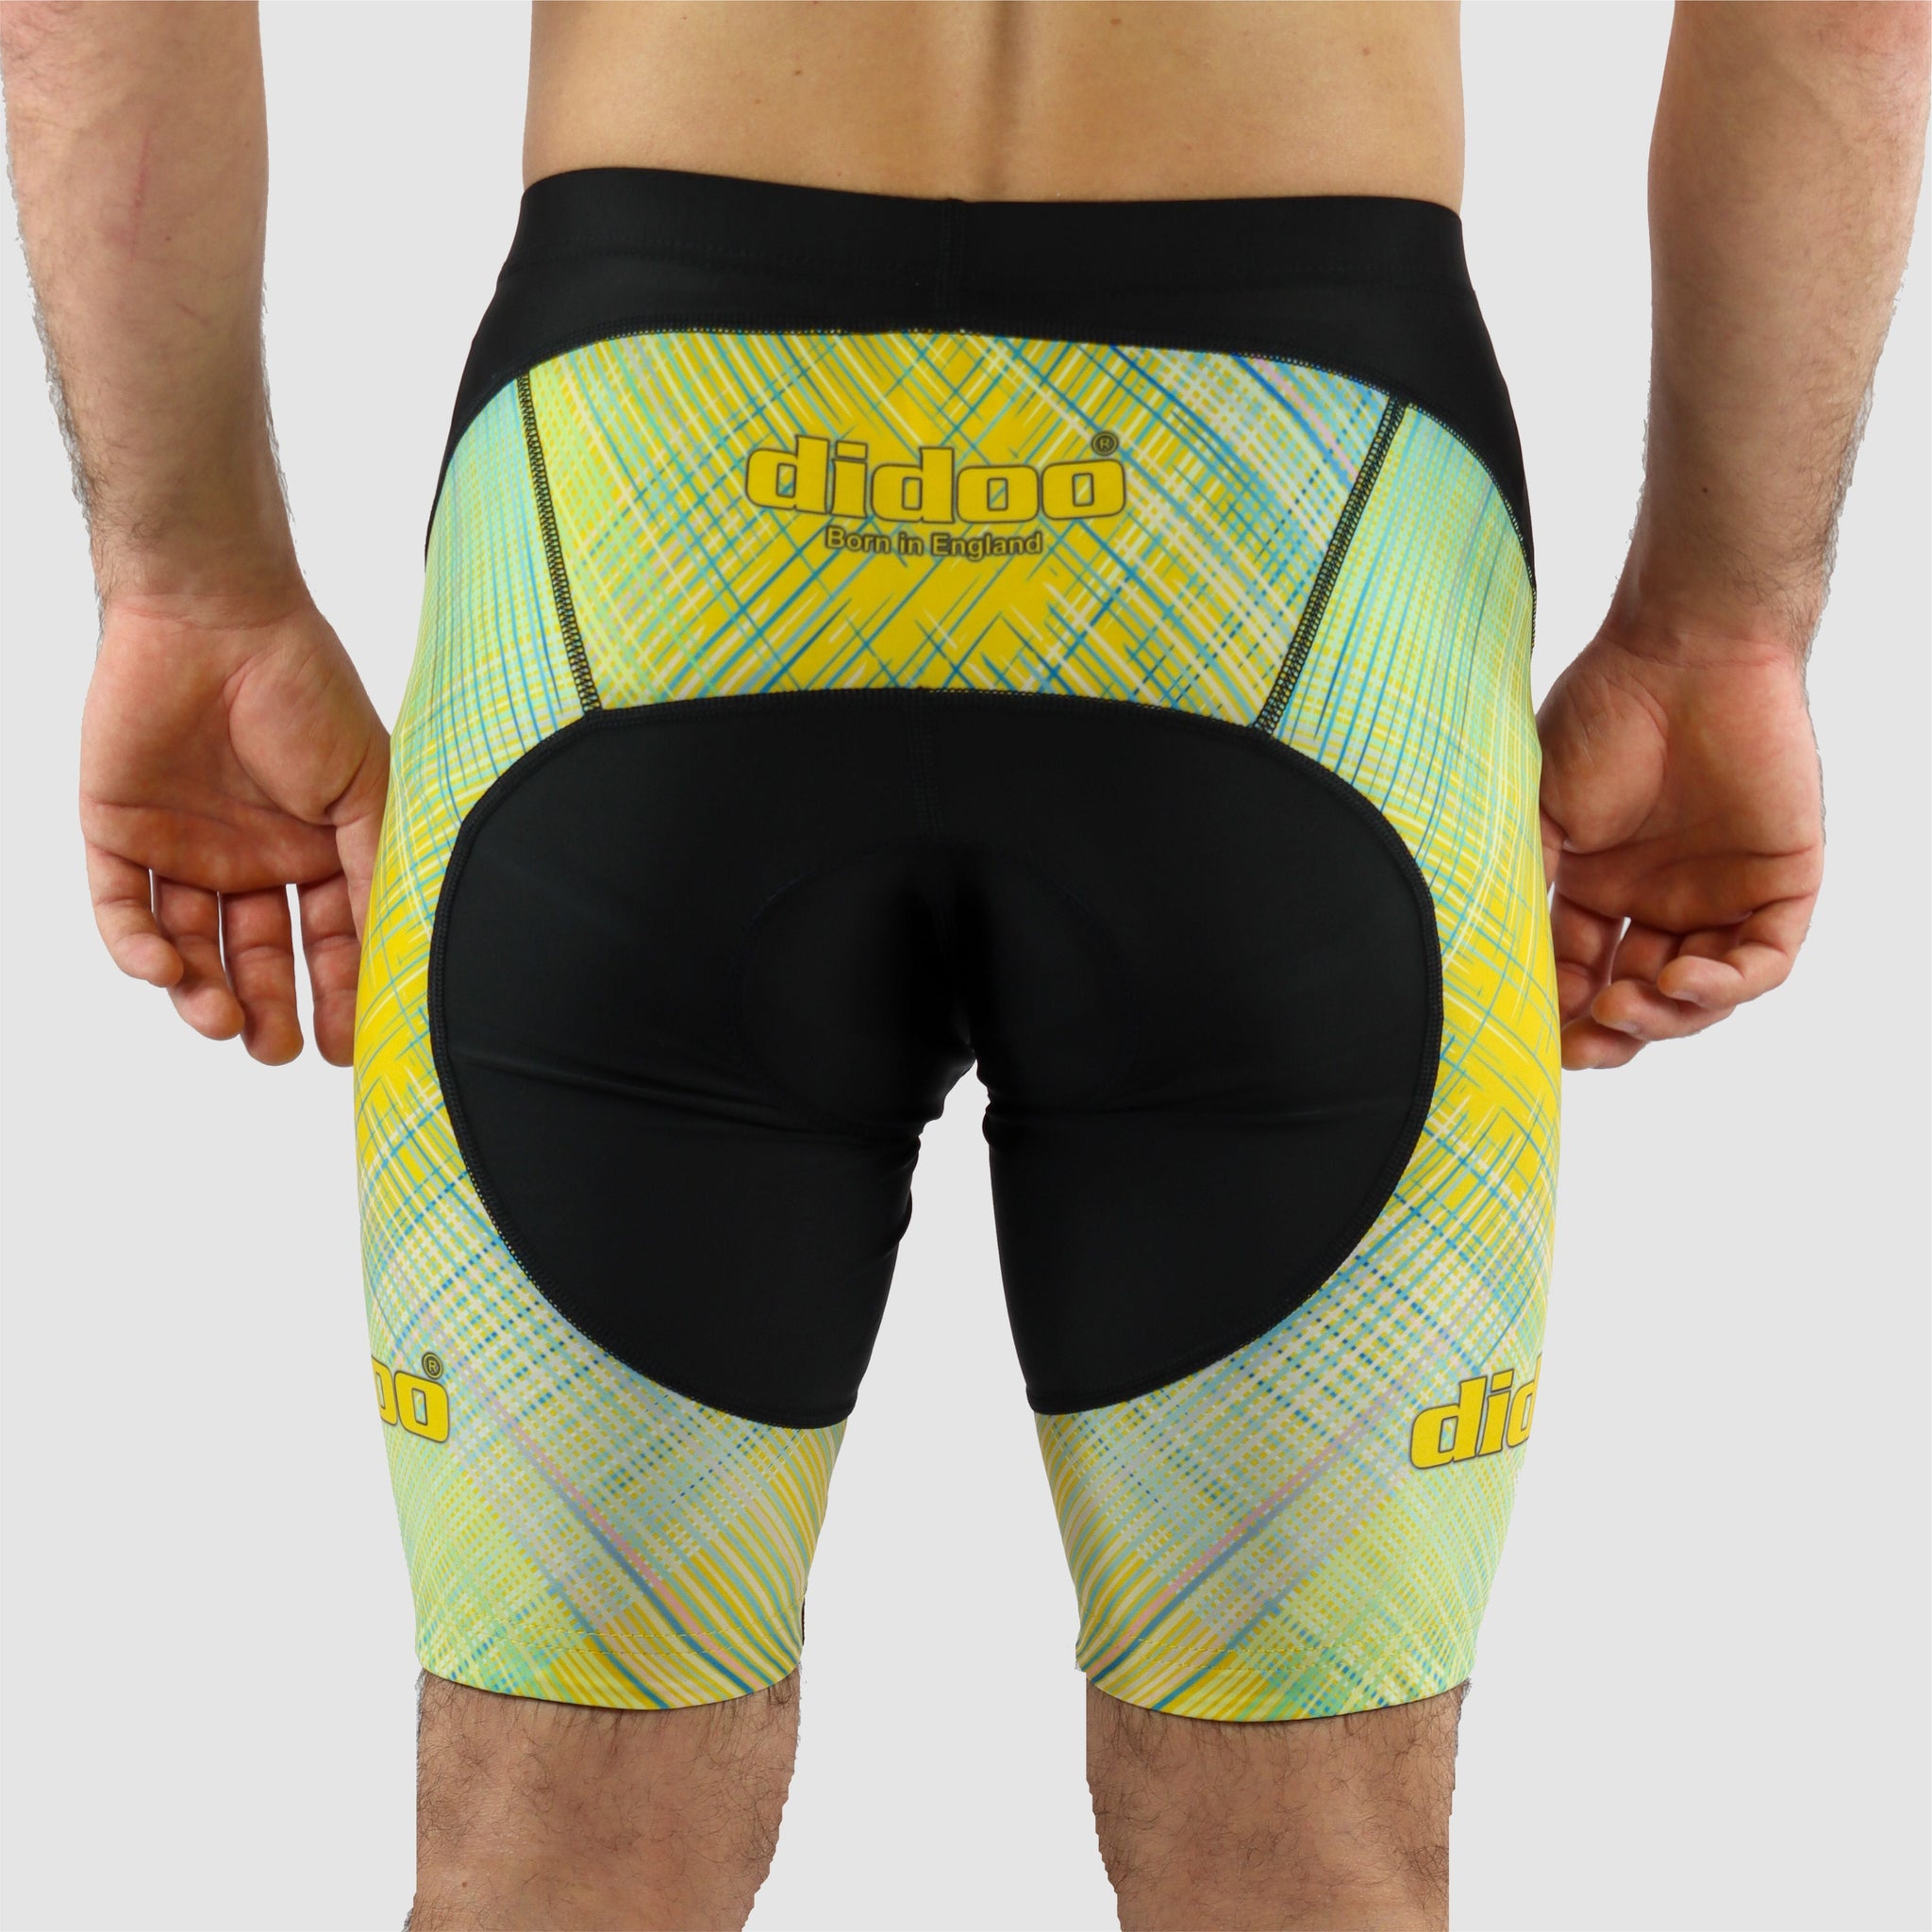 DiDOO Men's Classic Quick Dry Padded Cycling Shorts Black and Yellow